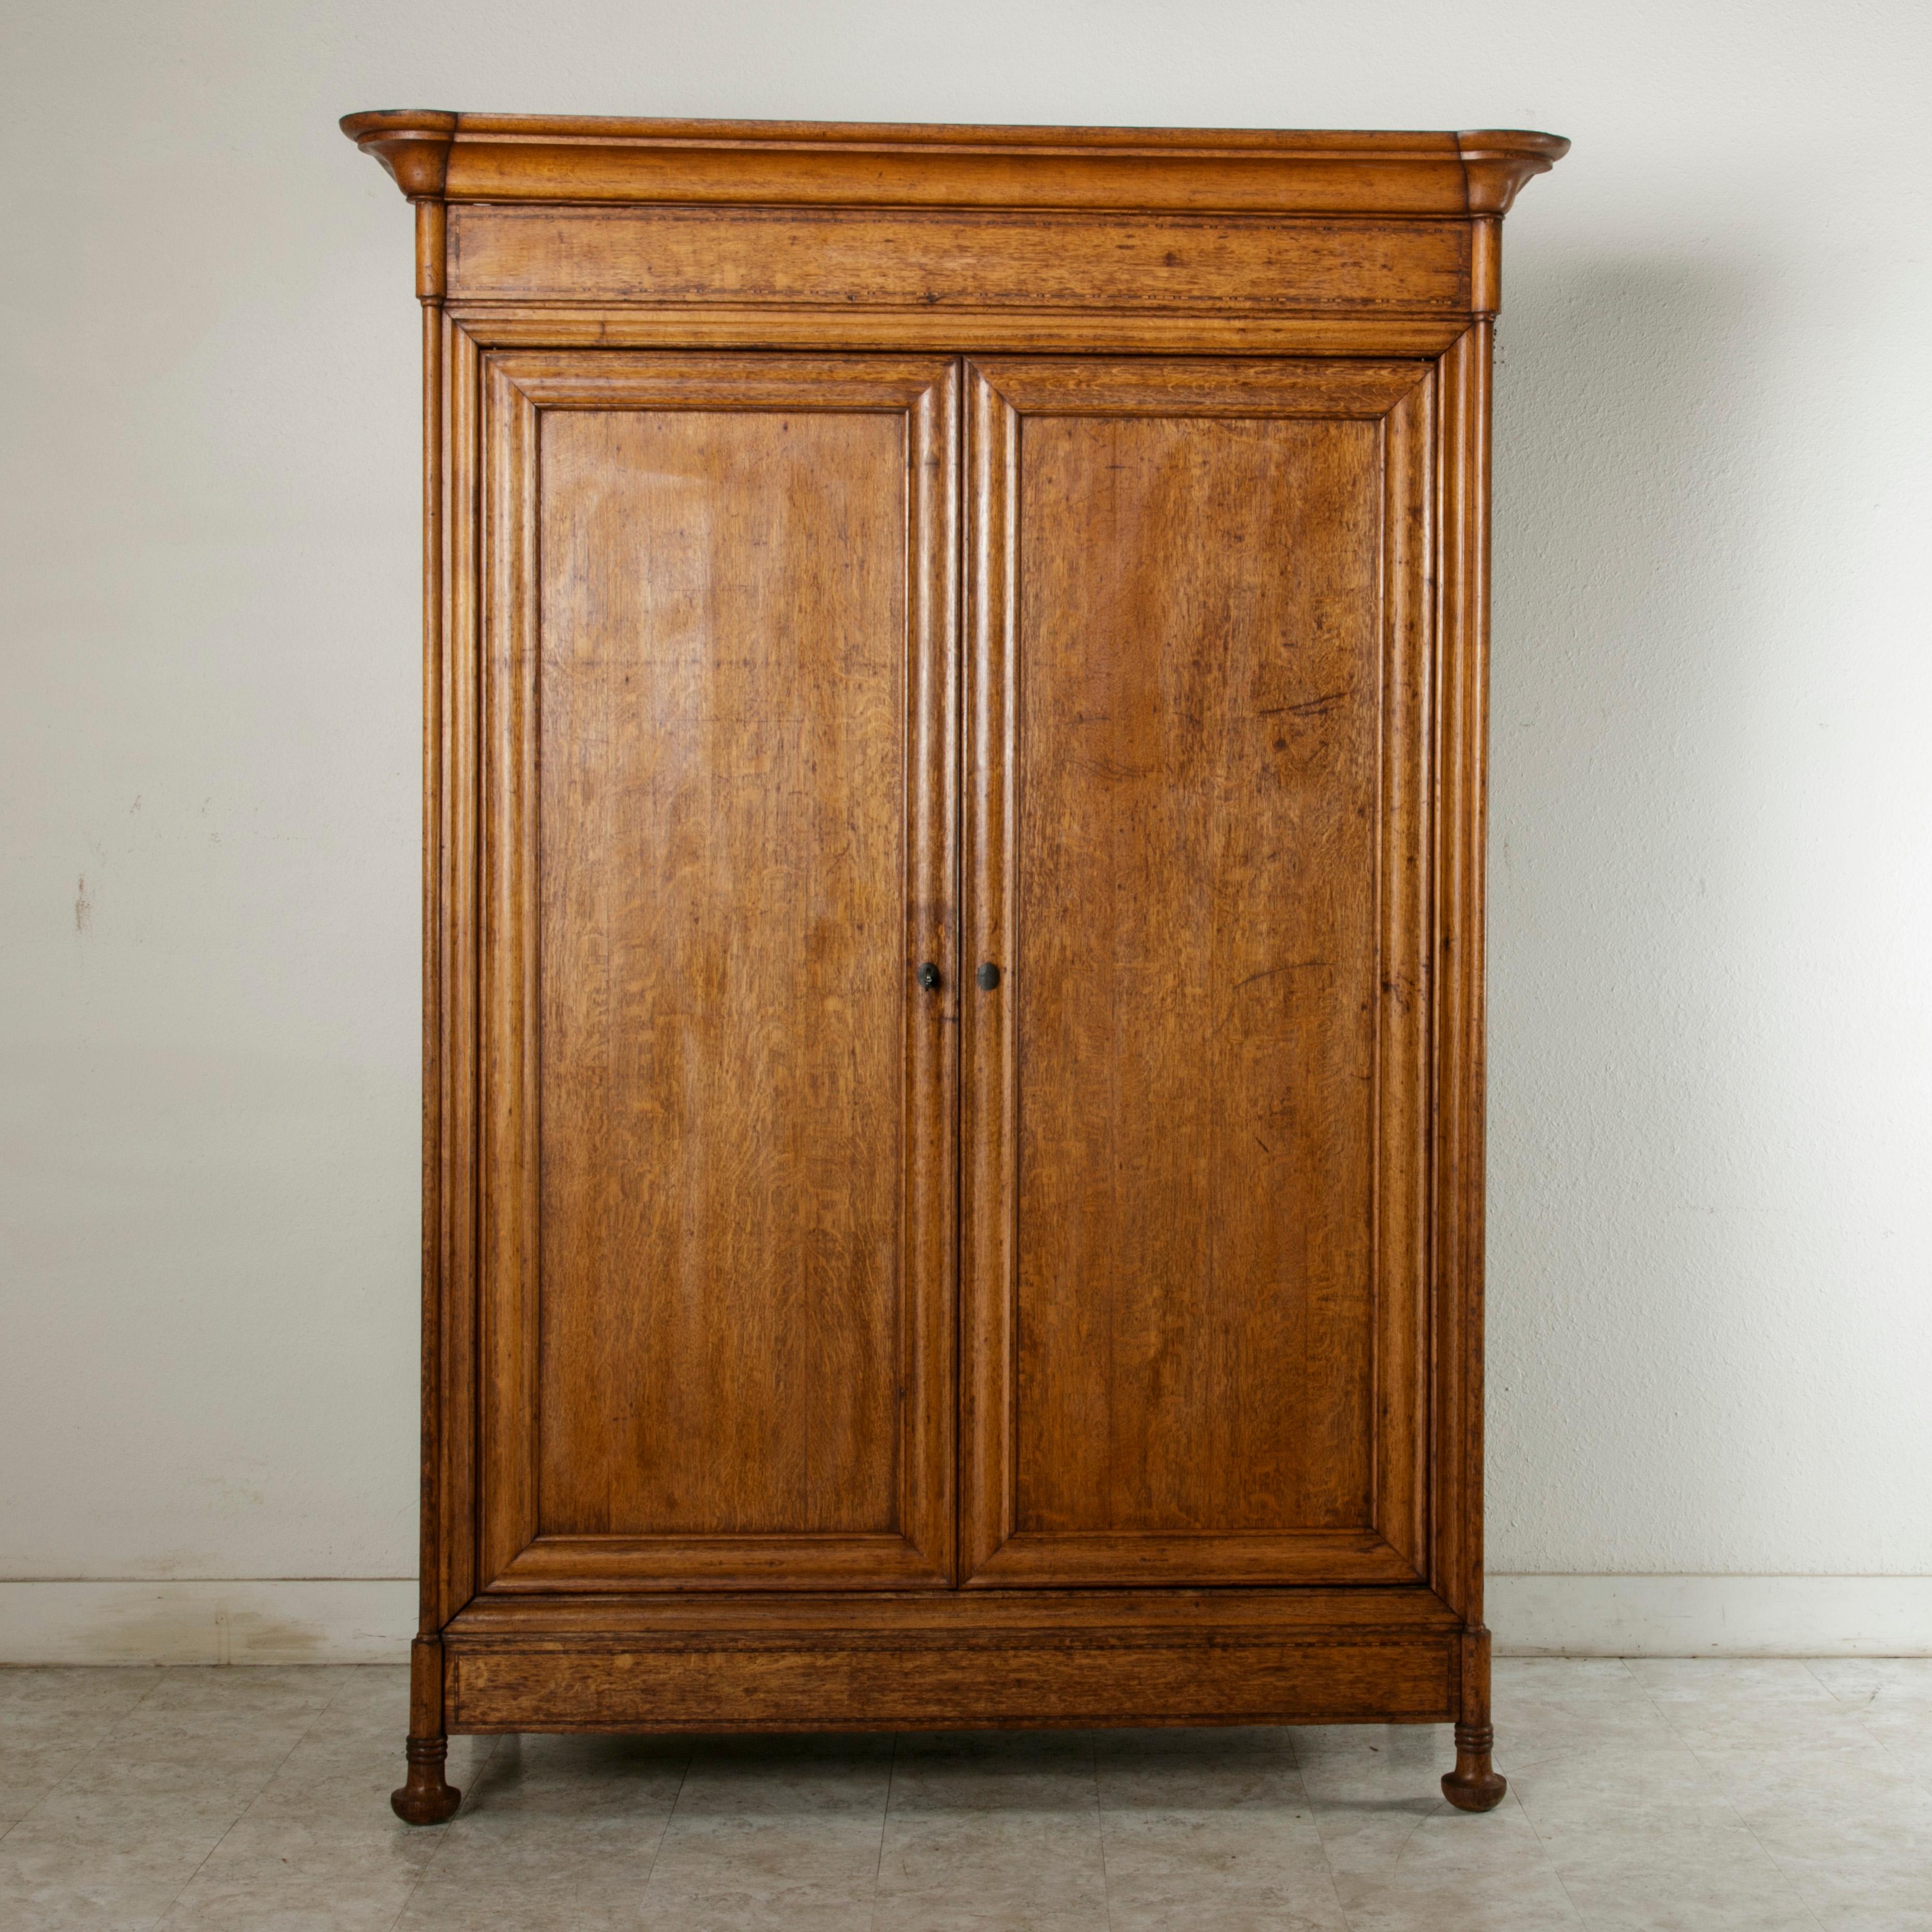 Found in Paris, this large scale Louis Philippe period armoire from the mid-19th century is constructed of solid oak and features rounded front corners and a subtle geometric border of inlaid ebonized pear wood on the facade. The armoire stands